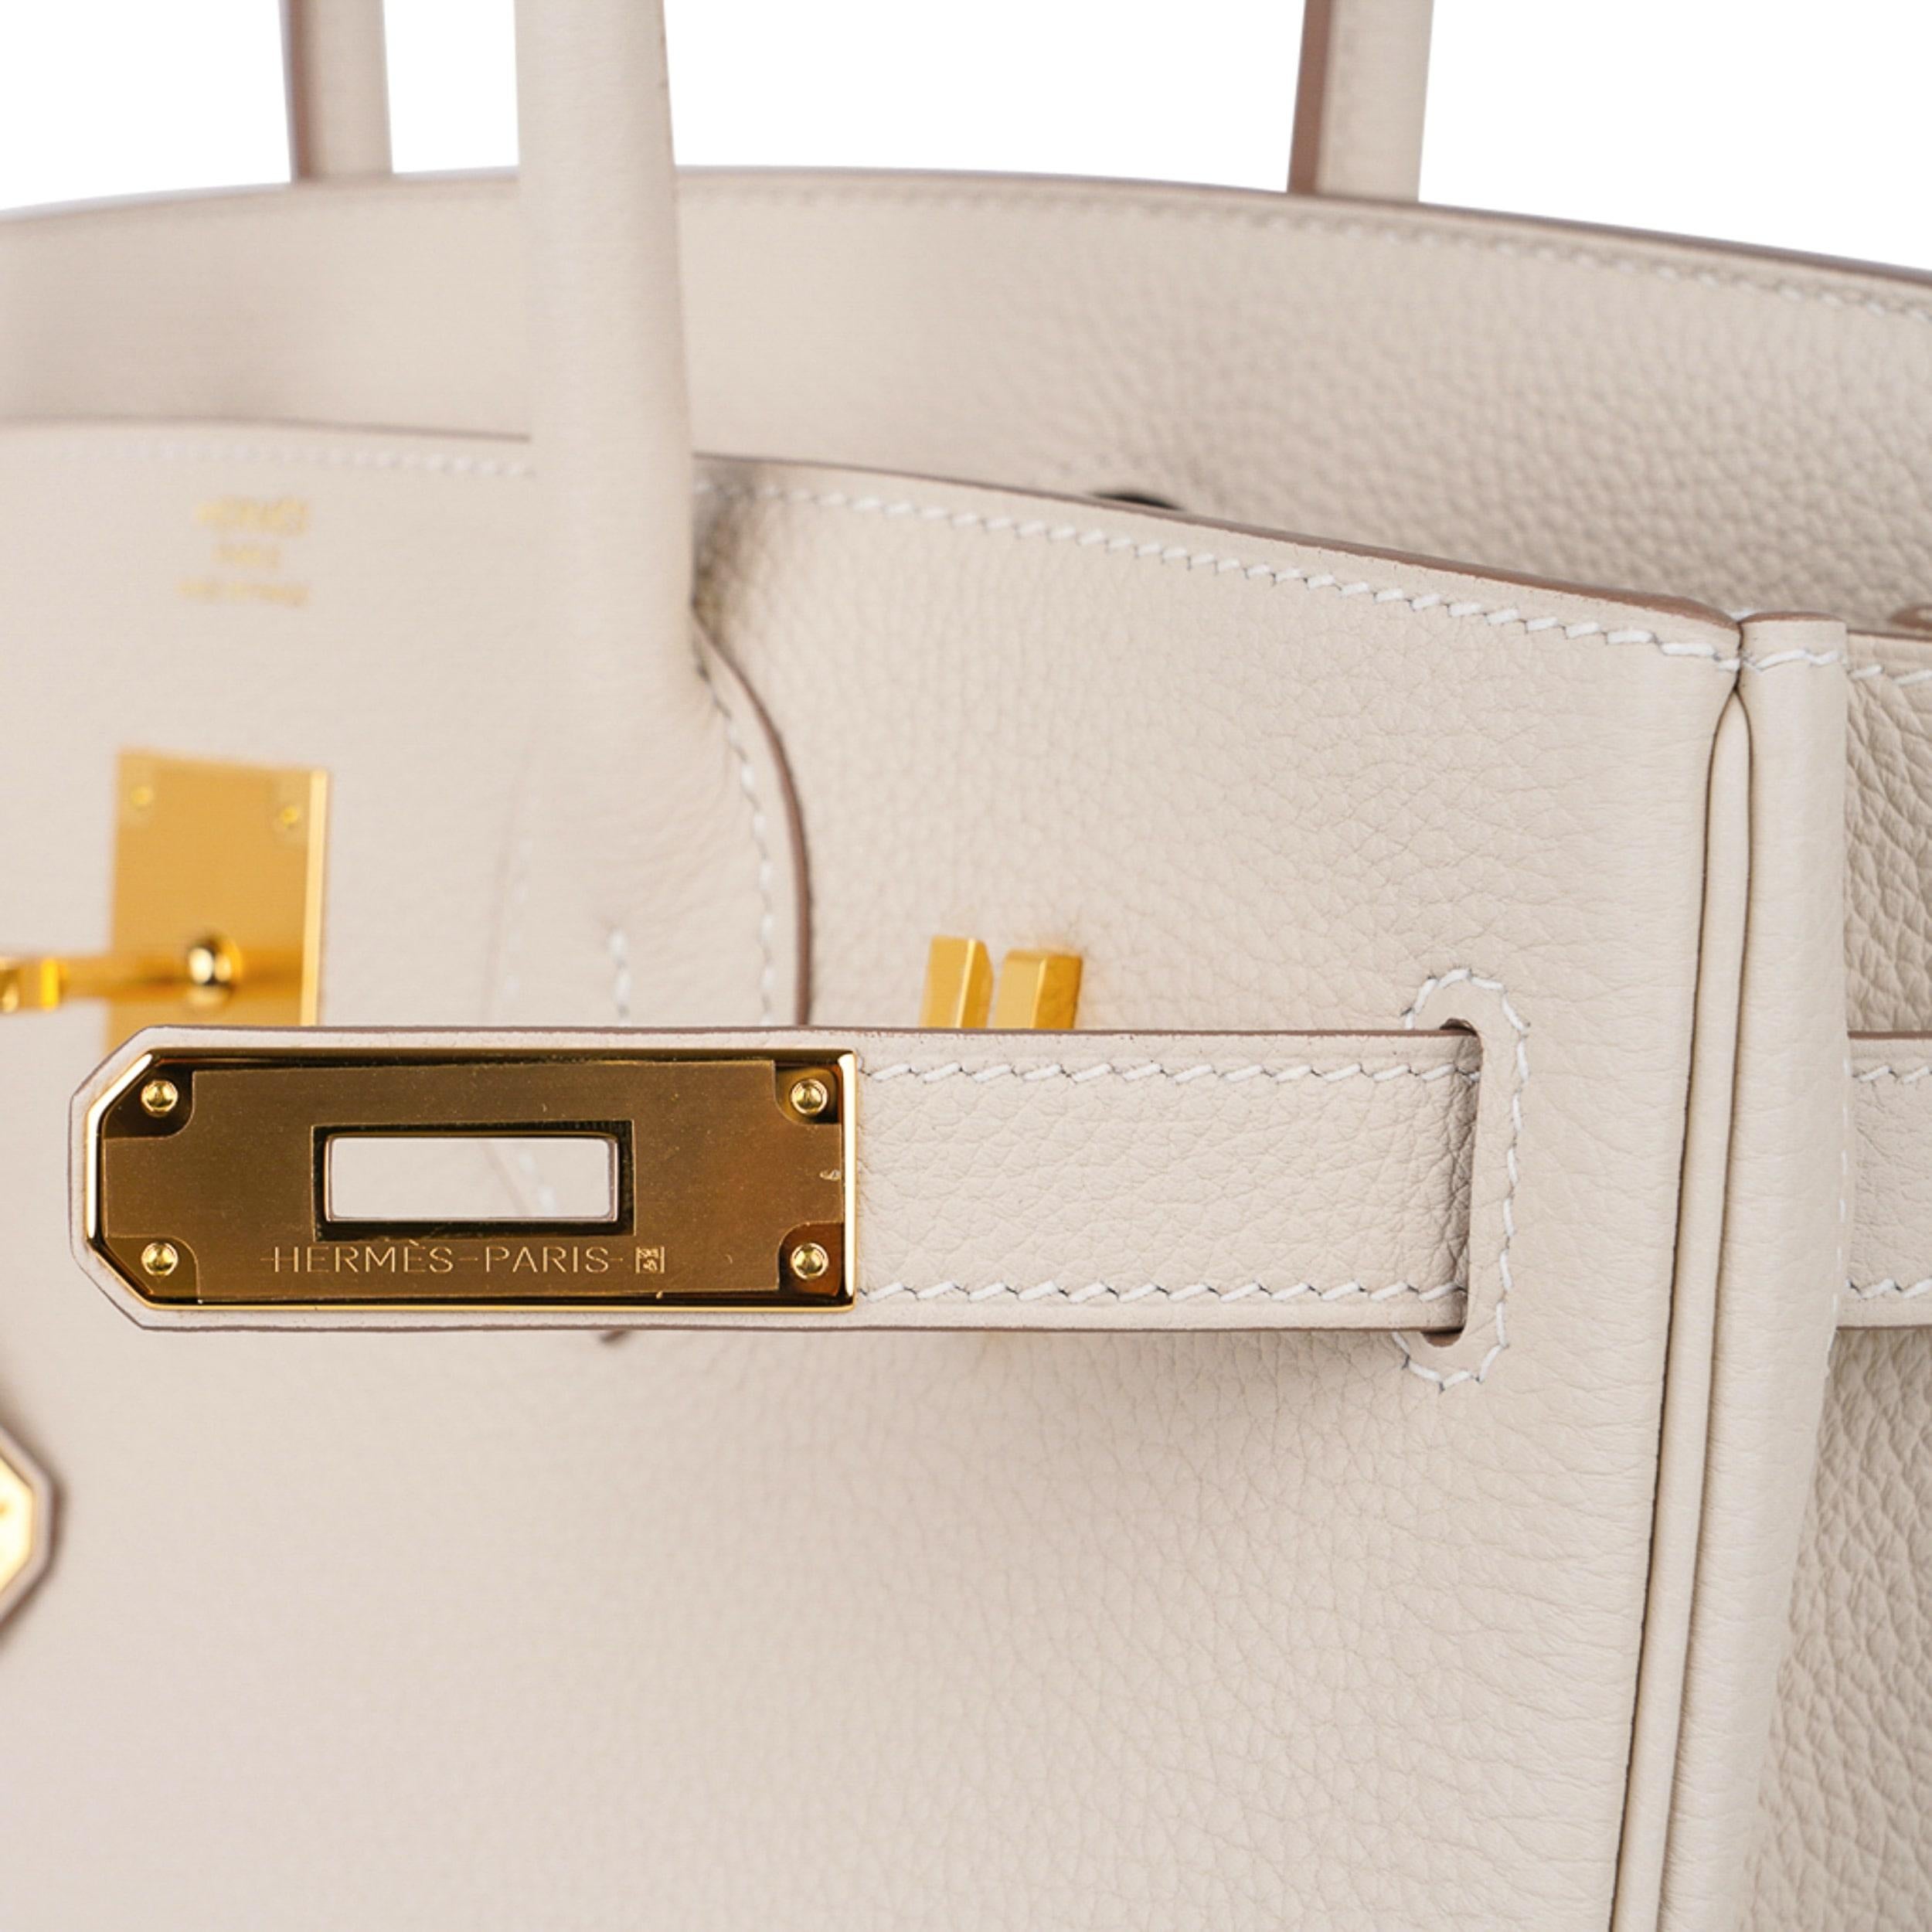 Hermes Birkin 30 Bag Craie Gold Hardware Togo Leather In New Condition For Sale In Miami, FL